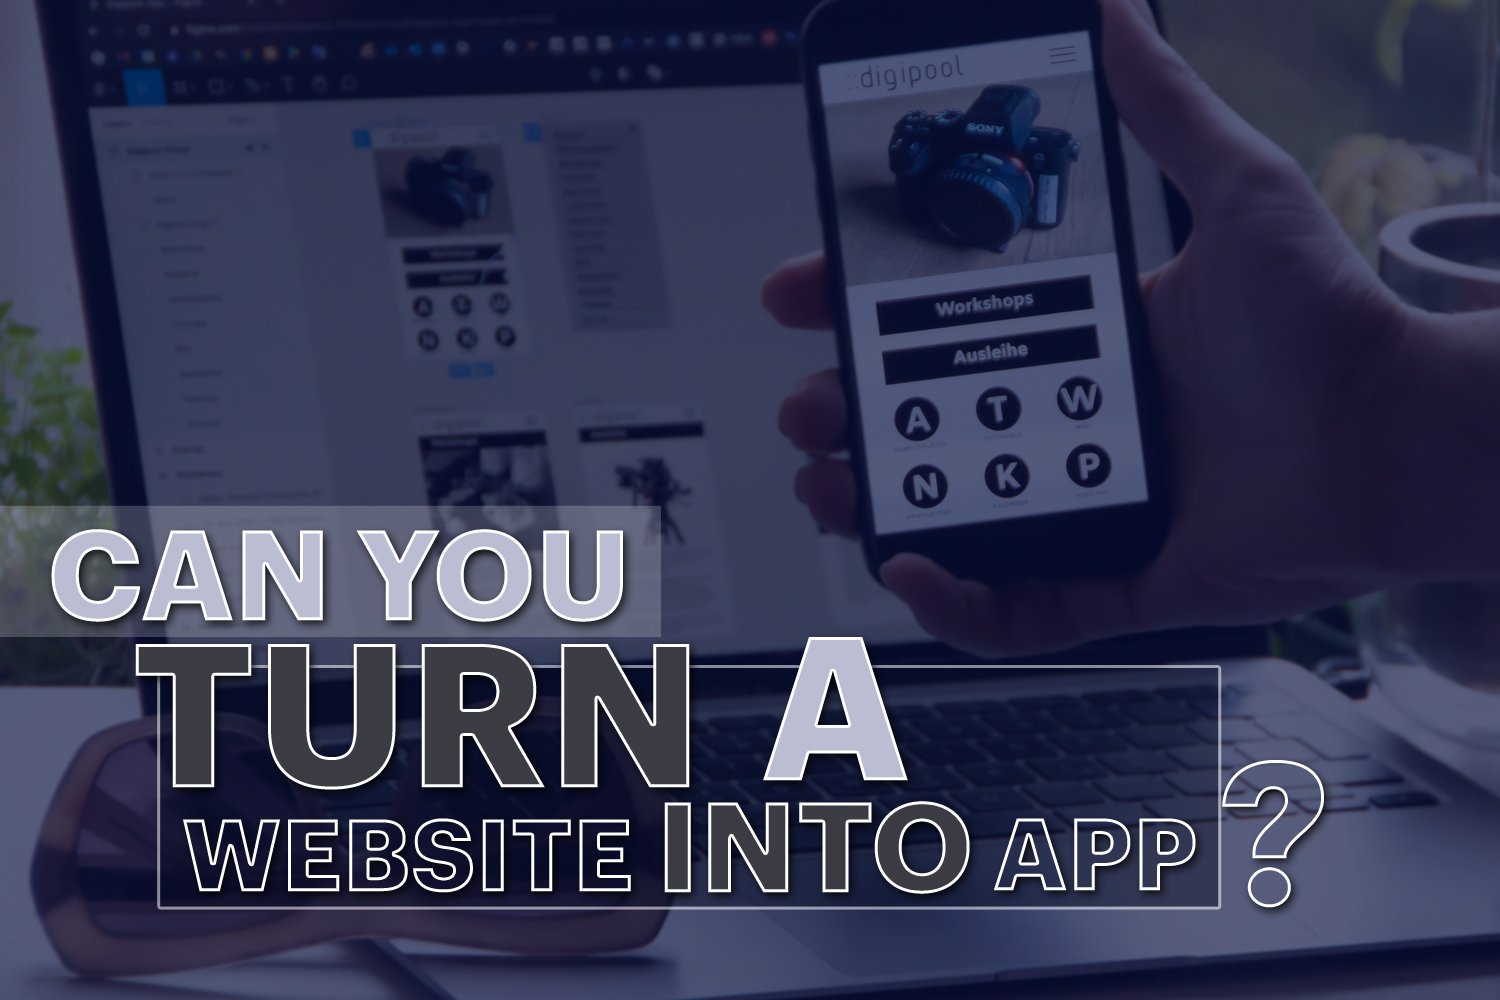 How to turn website into an app